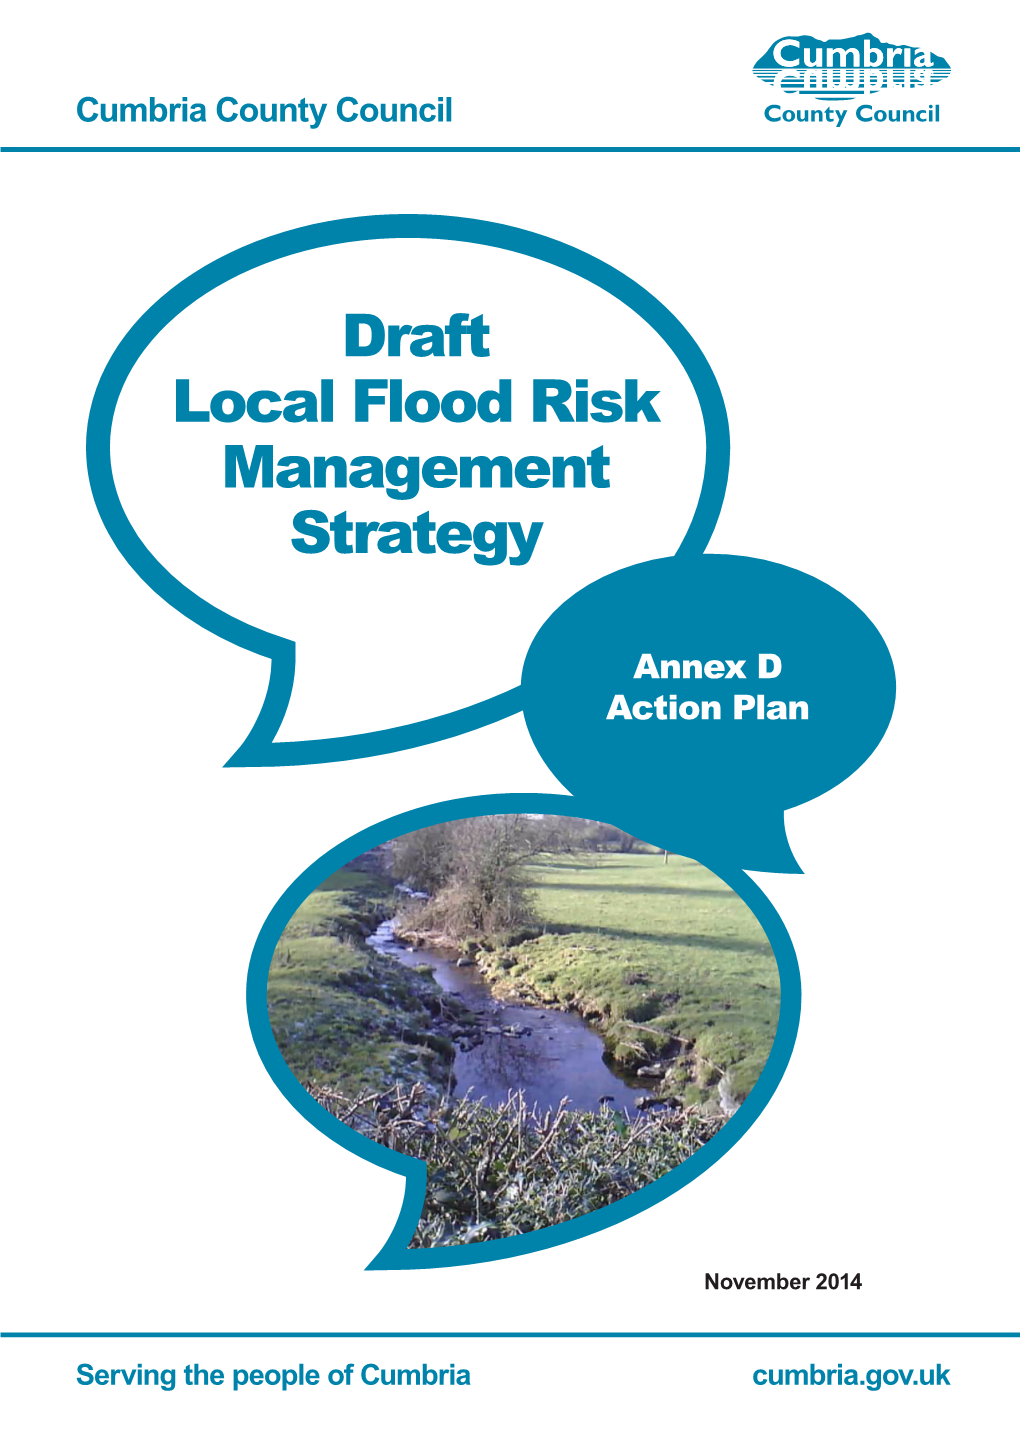 Draft Local Flood Risk Management Strategy